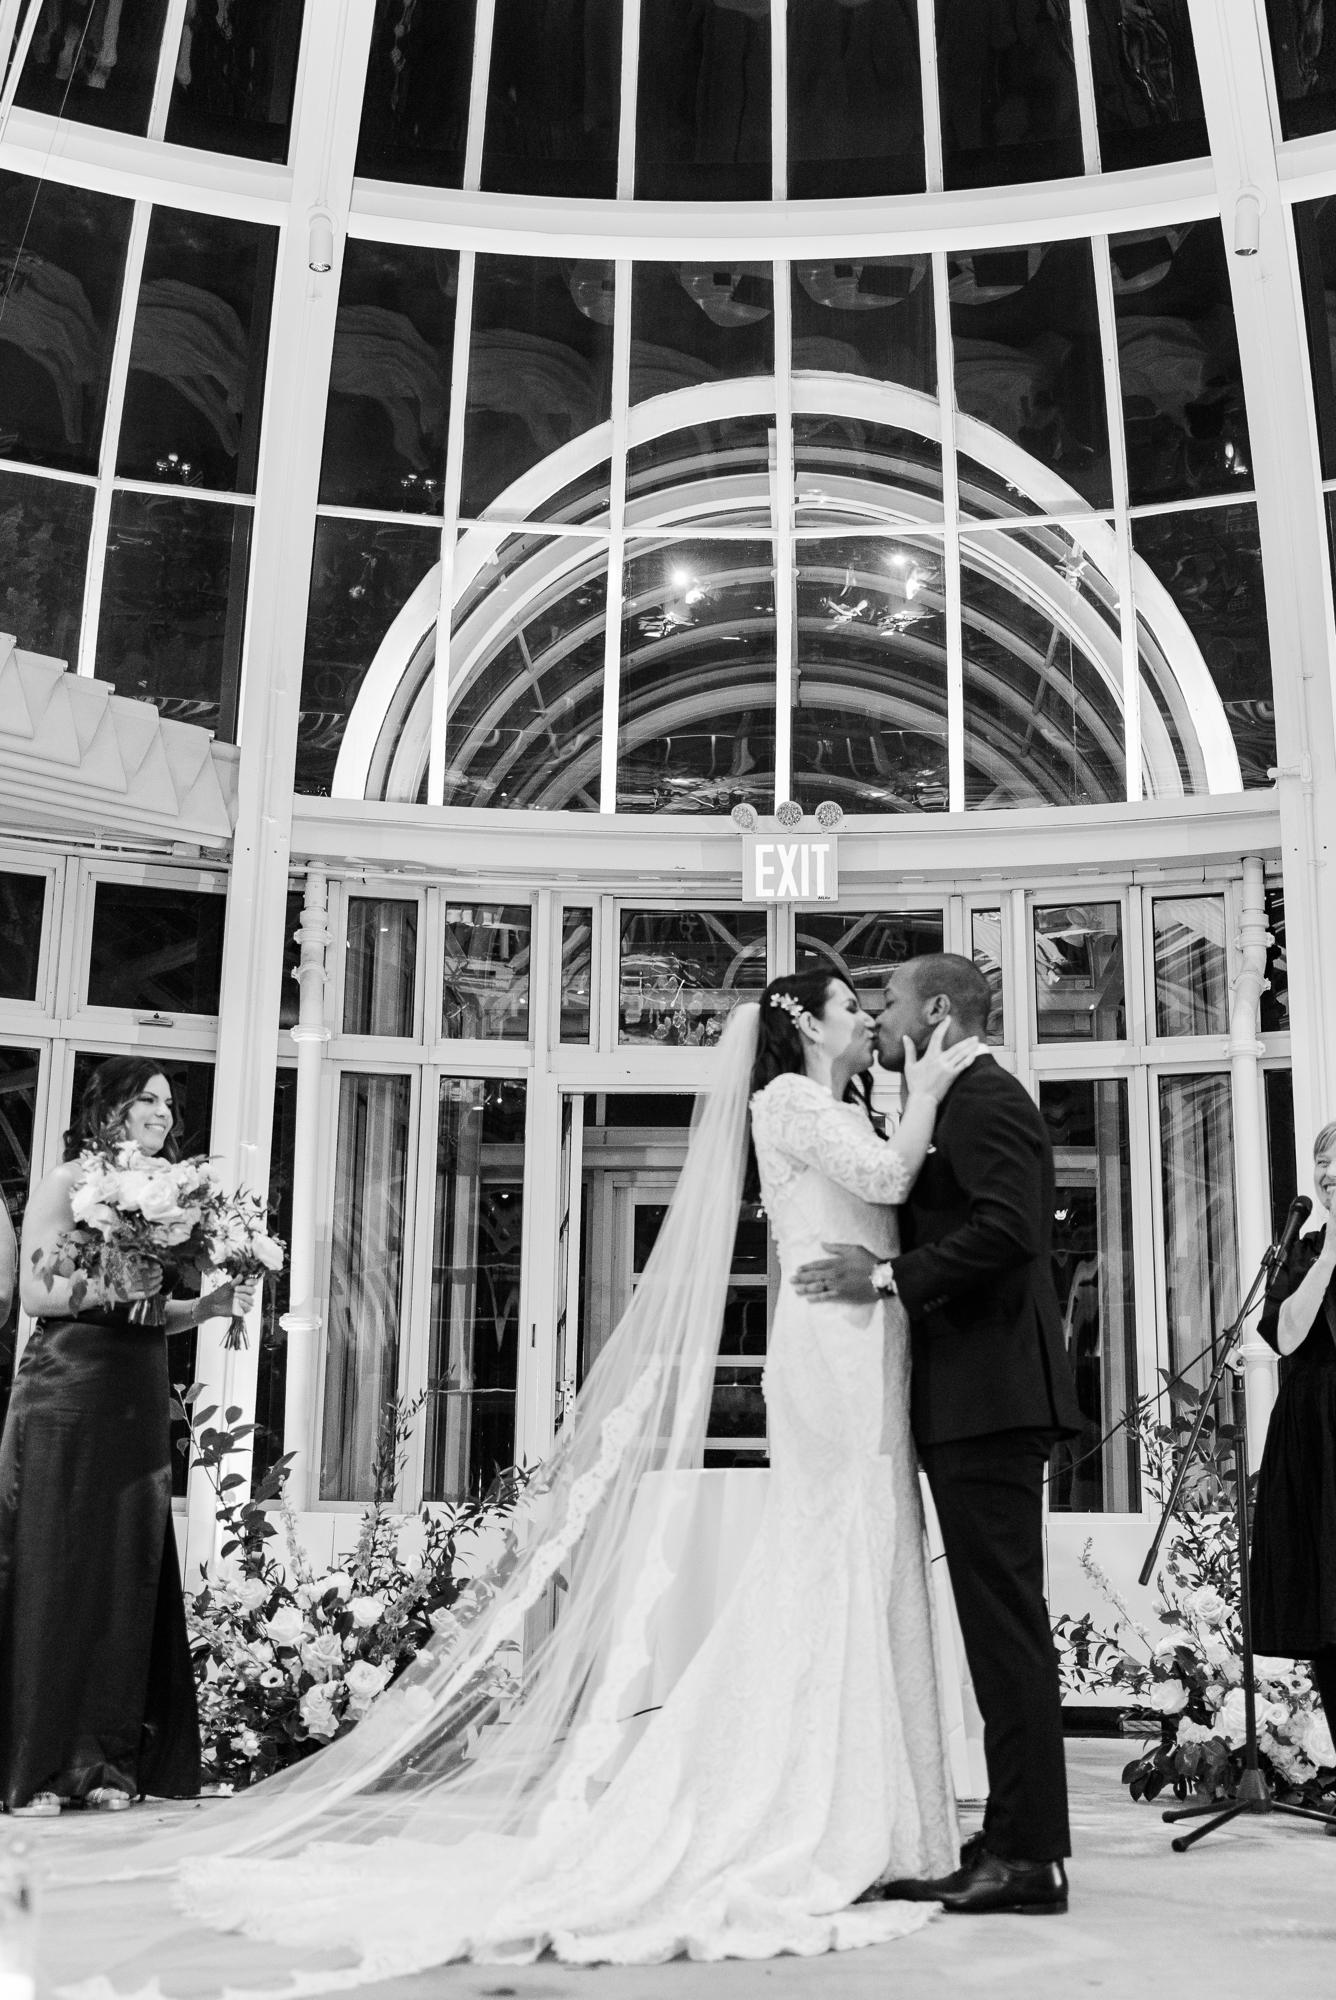 Iconic Palm House Wedding Photos at Brooklyn Botanic Garden in Winter